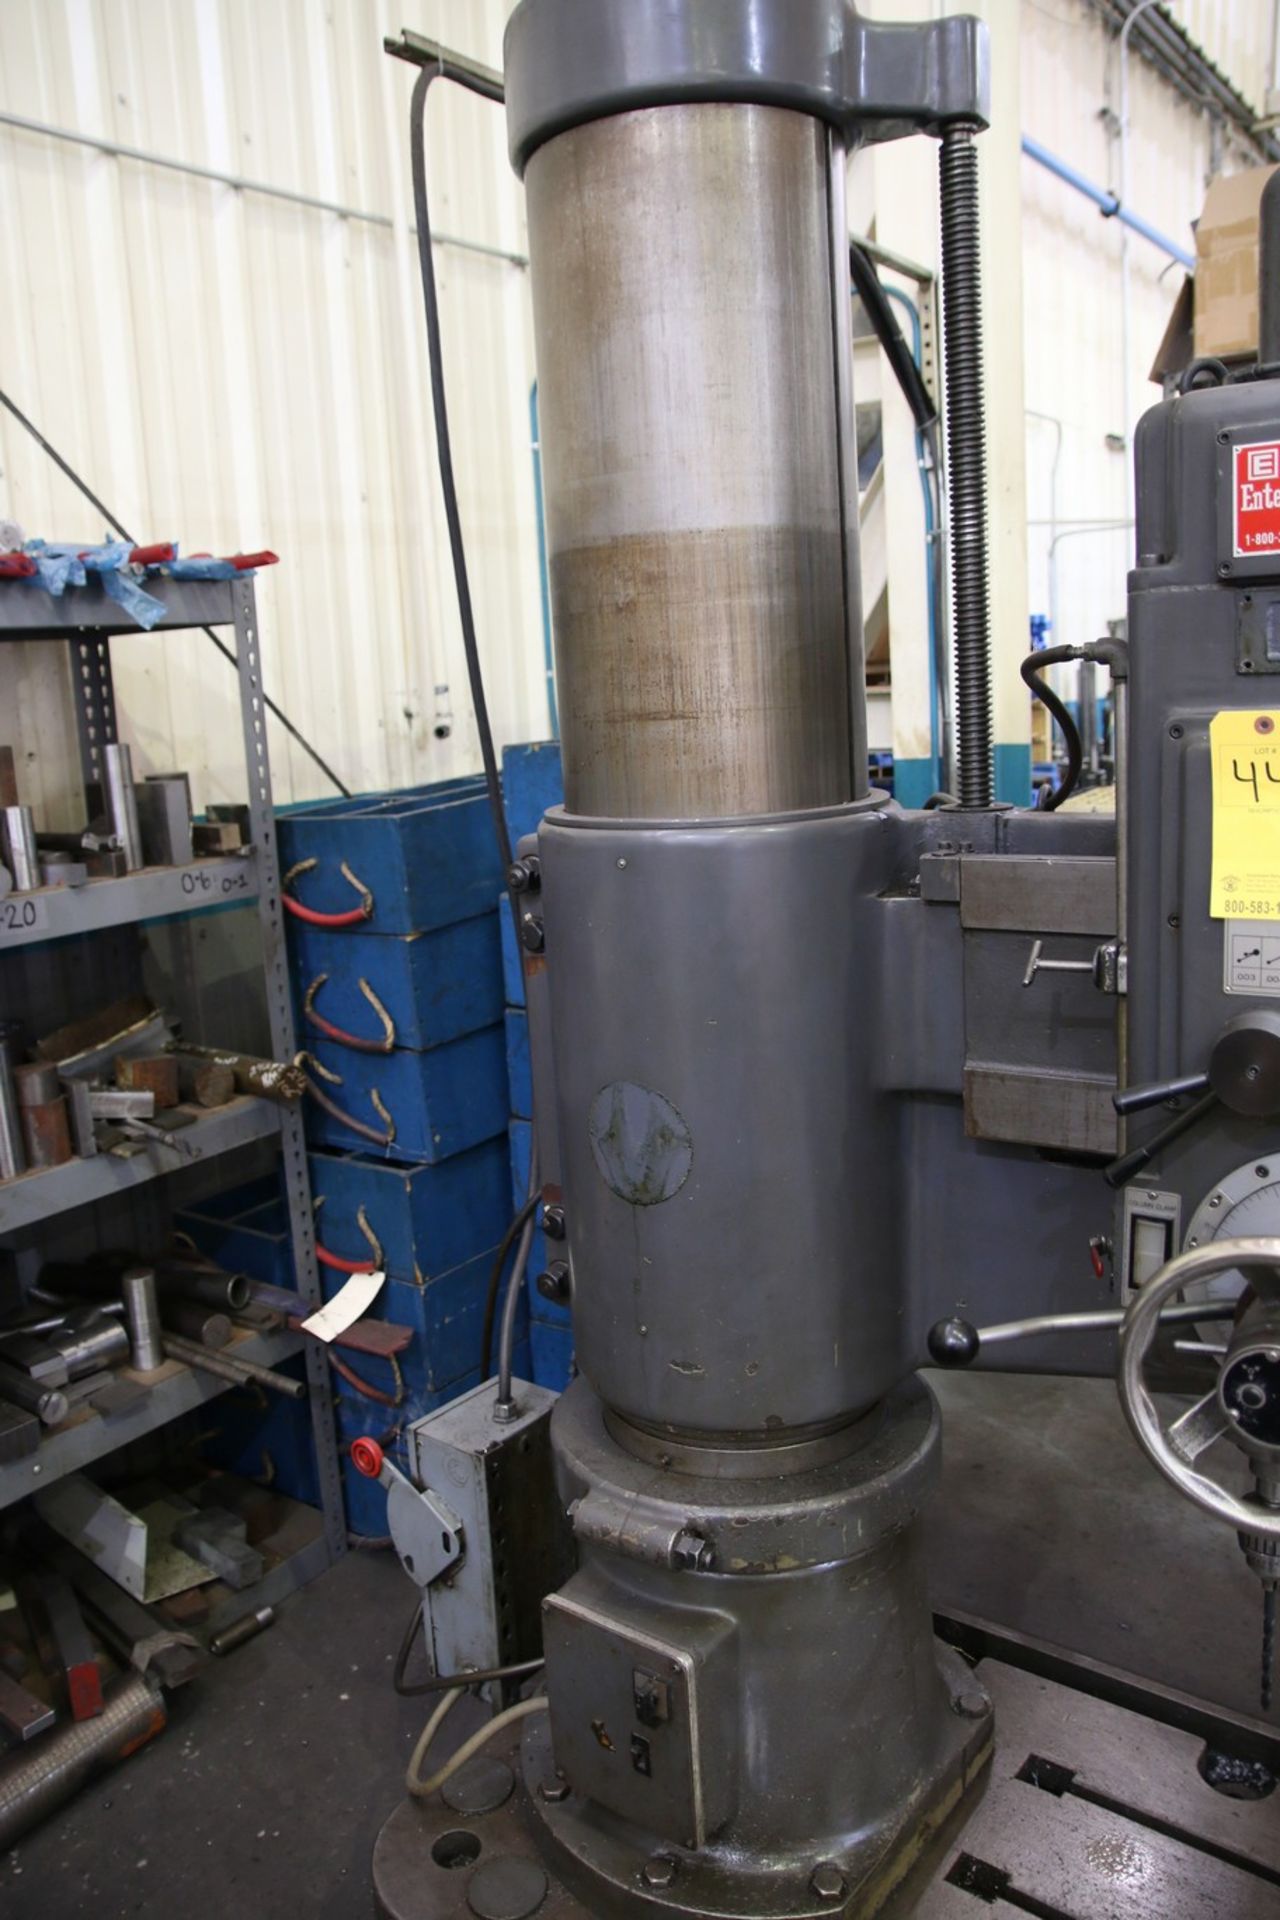 Ikeda RM-1575 Ikeda RM-1575 Radial Drilling Machine Includes T-Slot Box Table - Image 4 of 10